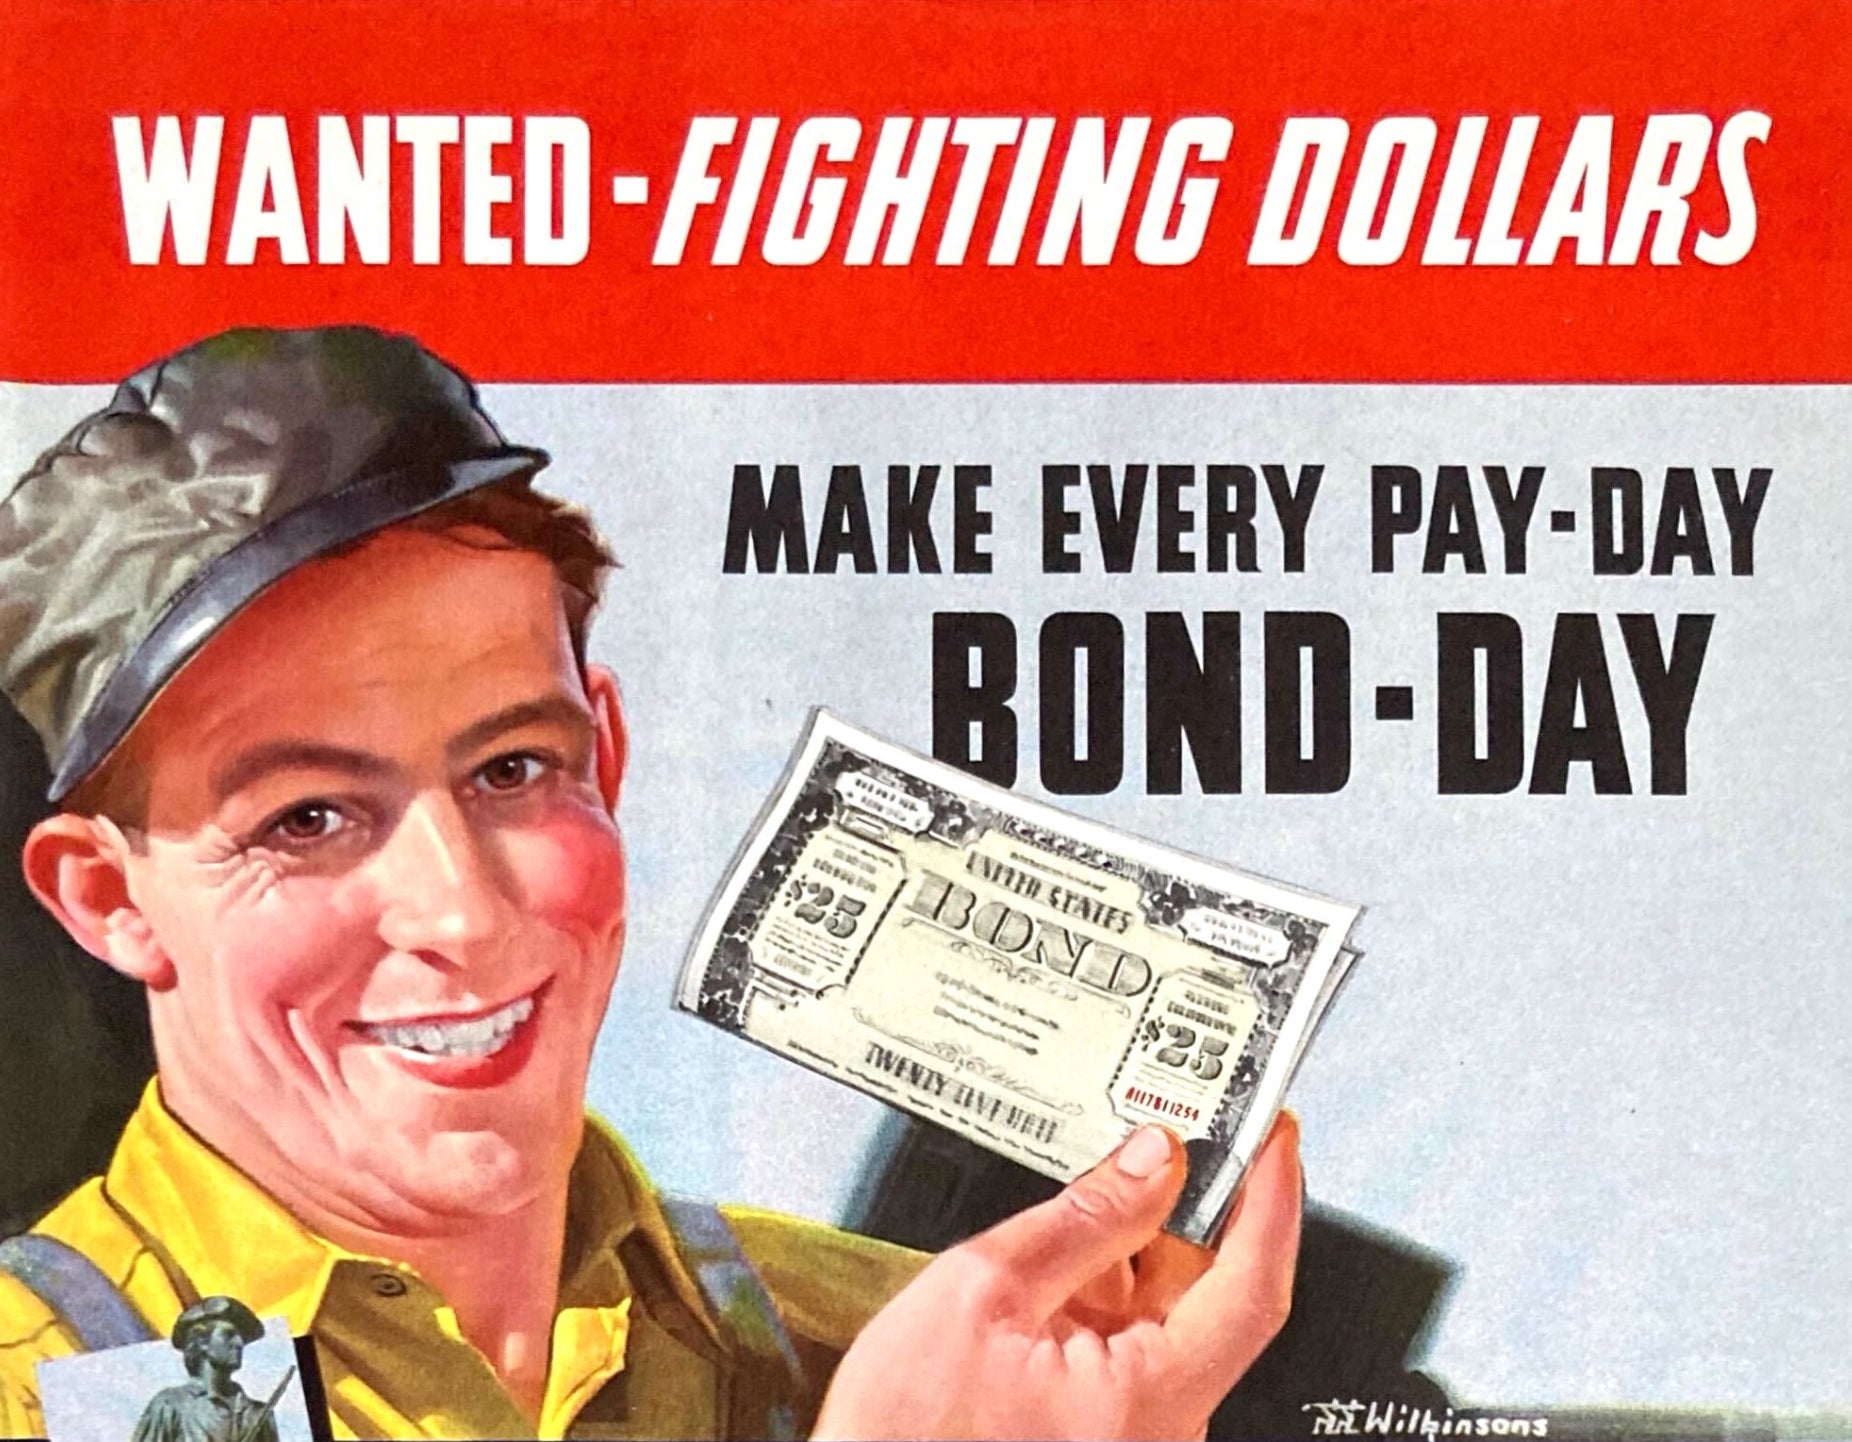 "Wanted - Fighting Dollars. Make Every Pay - Day Bond - Day" Vintage WWII Defense Bonds Poster, 1942 - The Great Republic